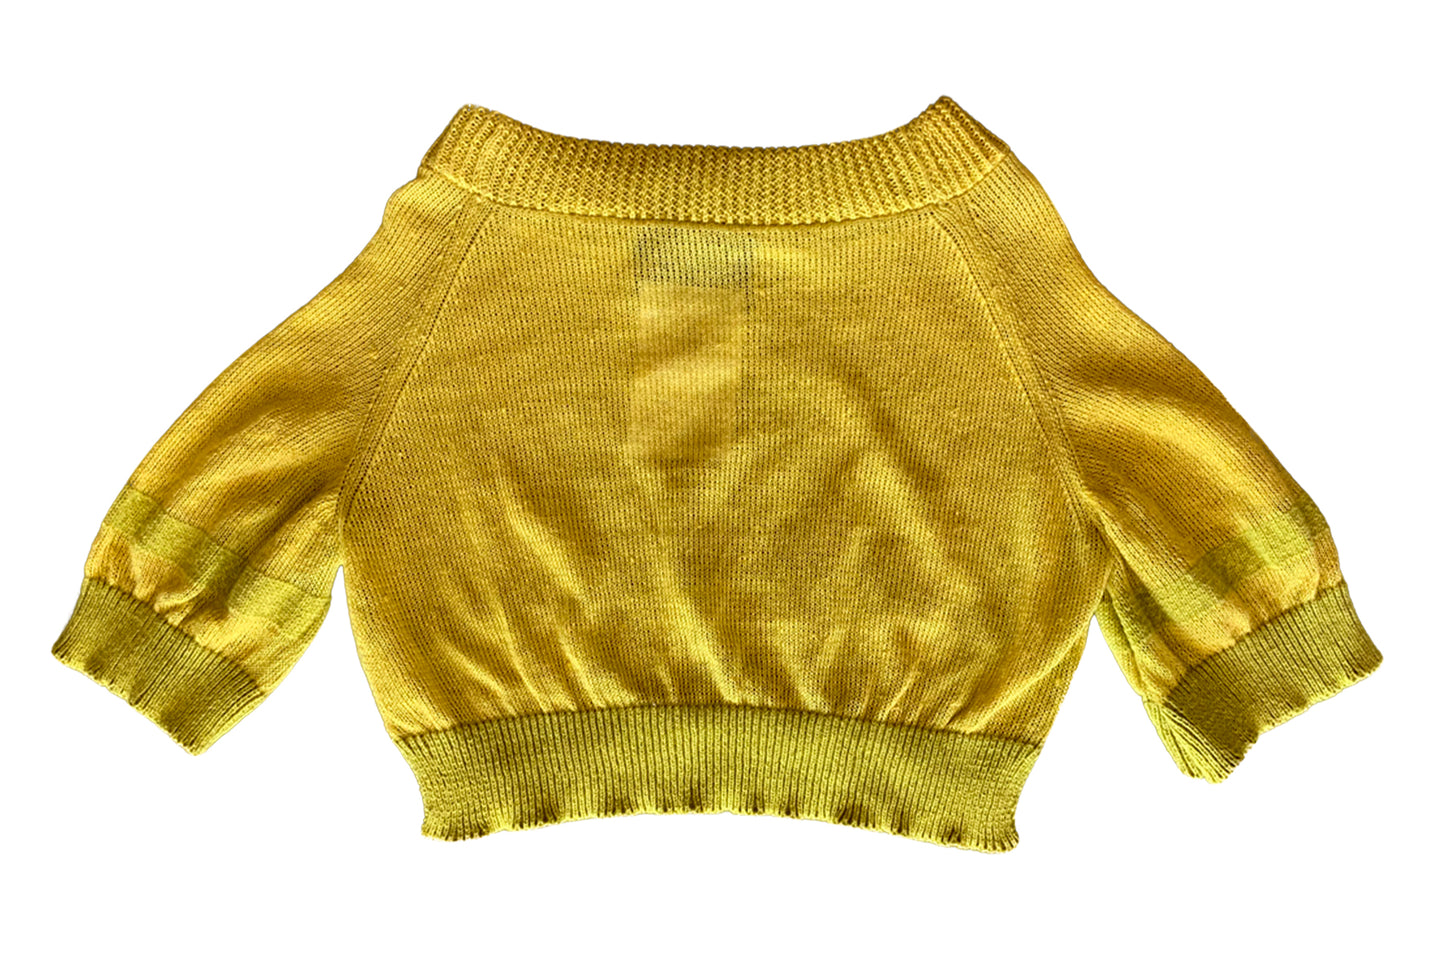 Locally Knitted Linen Top